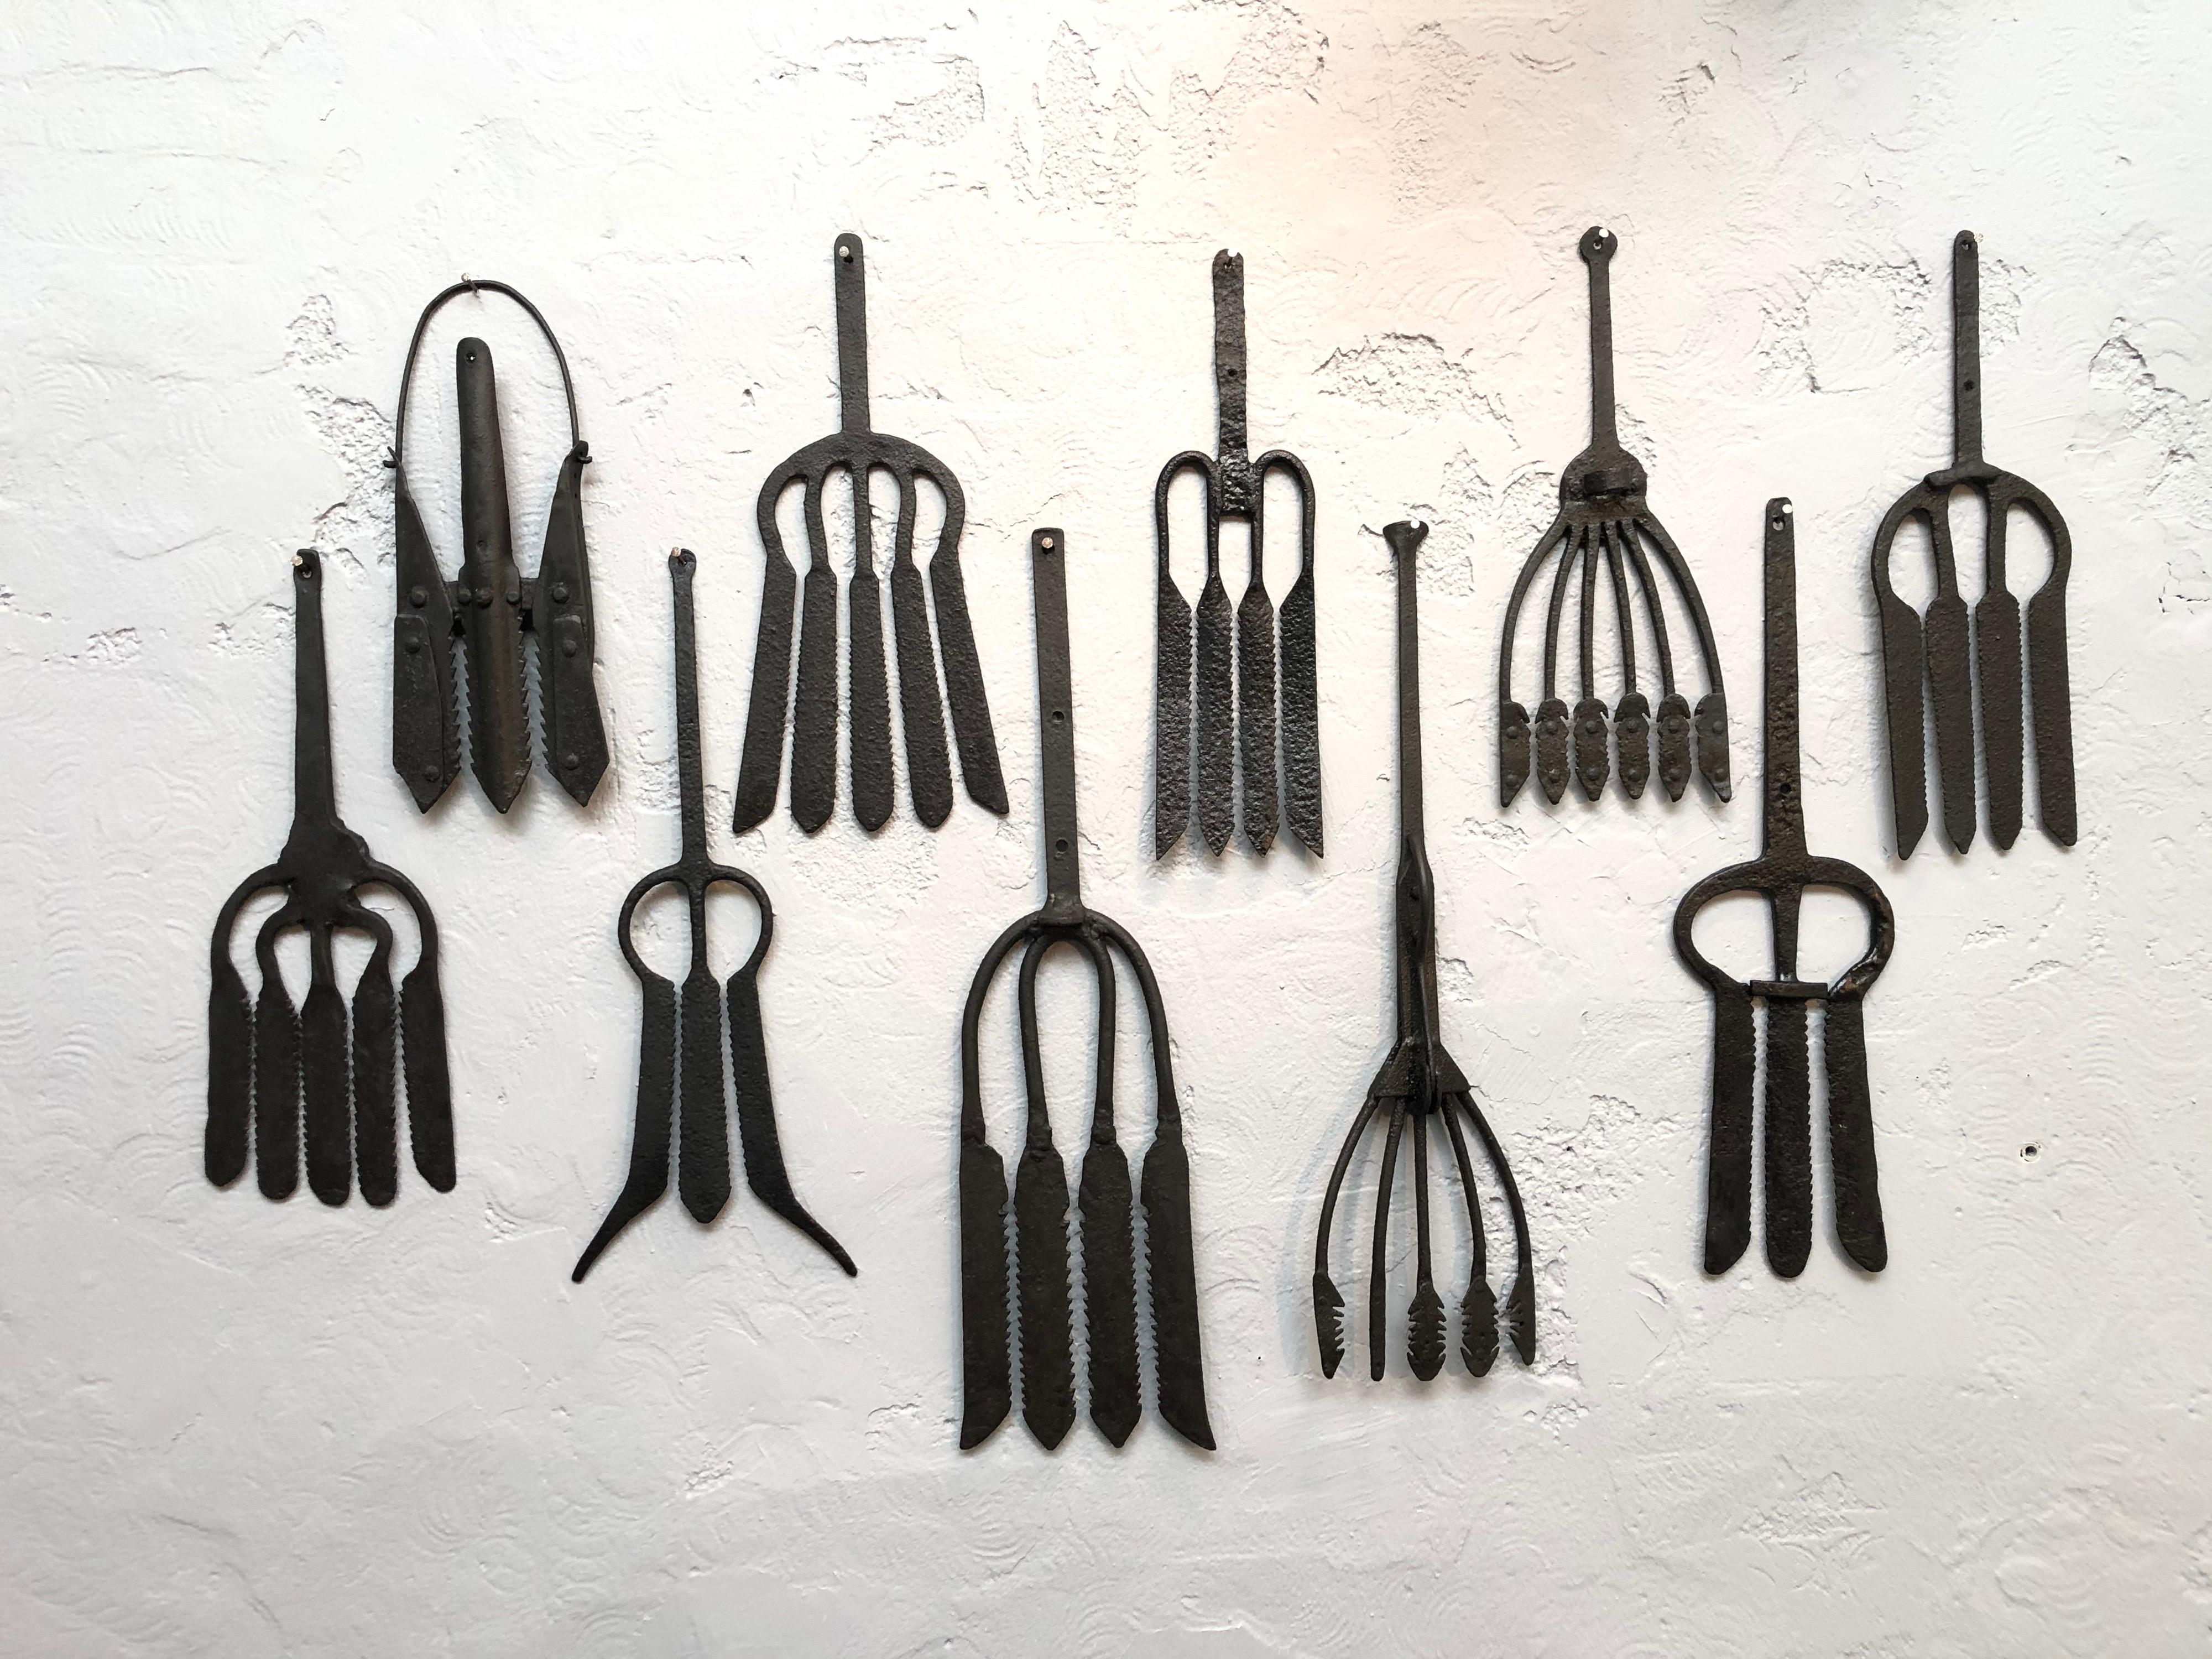 A collection of 10 wrought iron eel forks from the 18th century.
Extremely decorative and each one unique.
Each one is a work of art.
Sizes vary from 36 cm to 63 cm.
Would look amazing in a fish restaurant, bar, club or even in your home.
In 2009